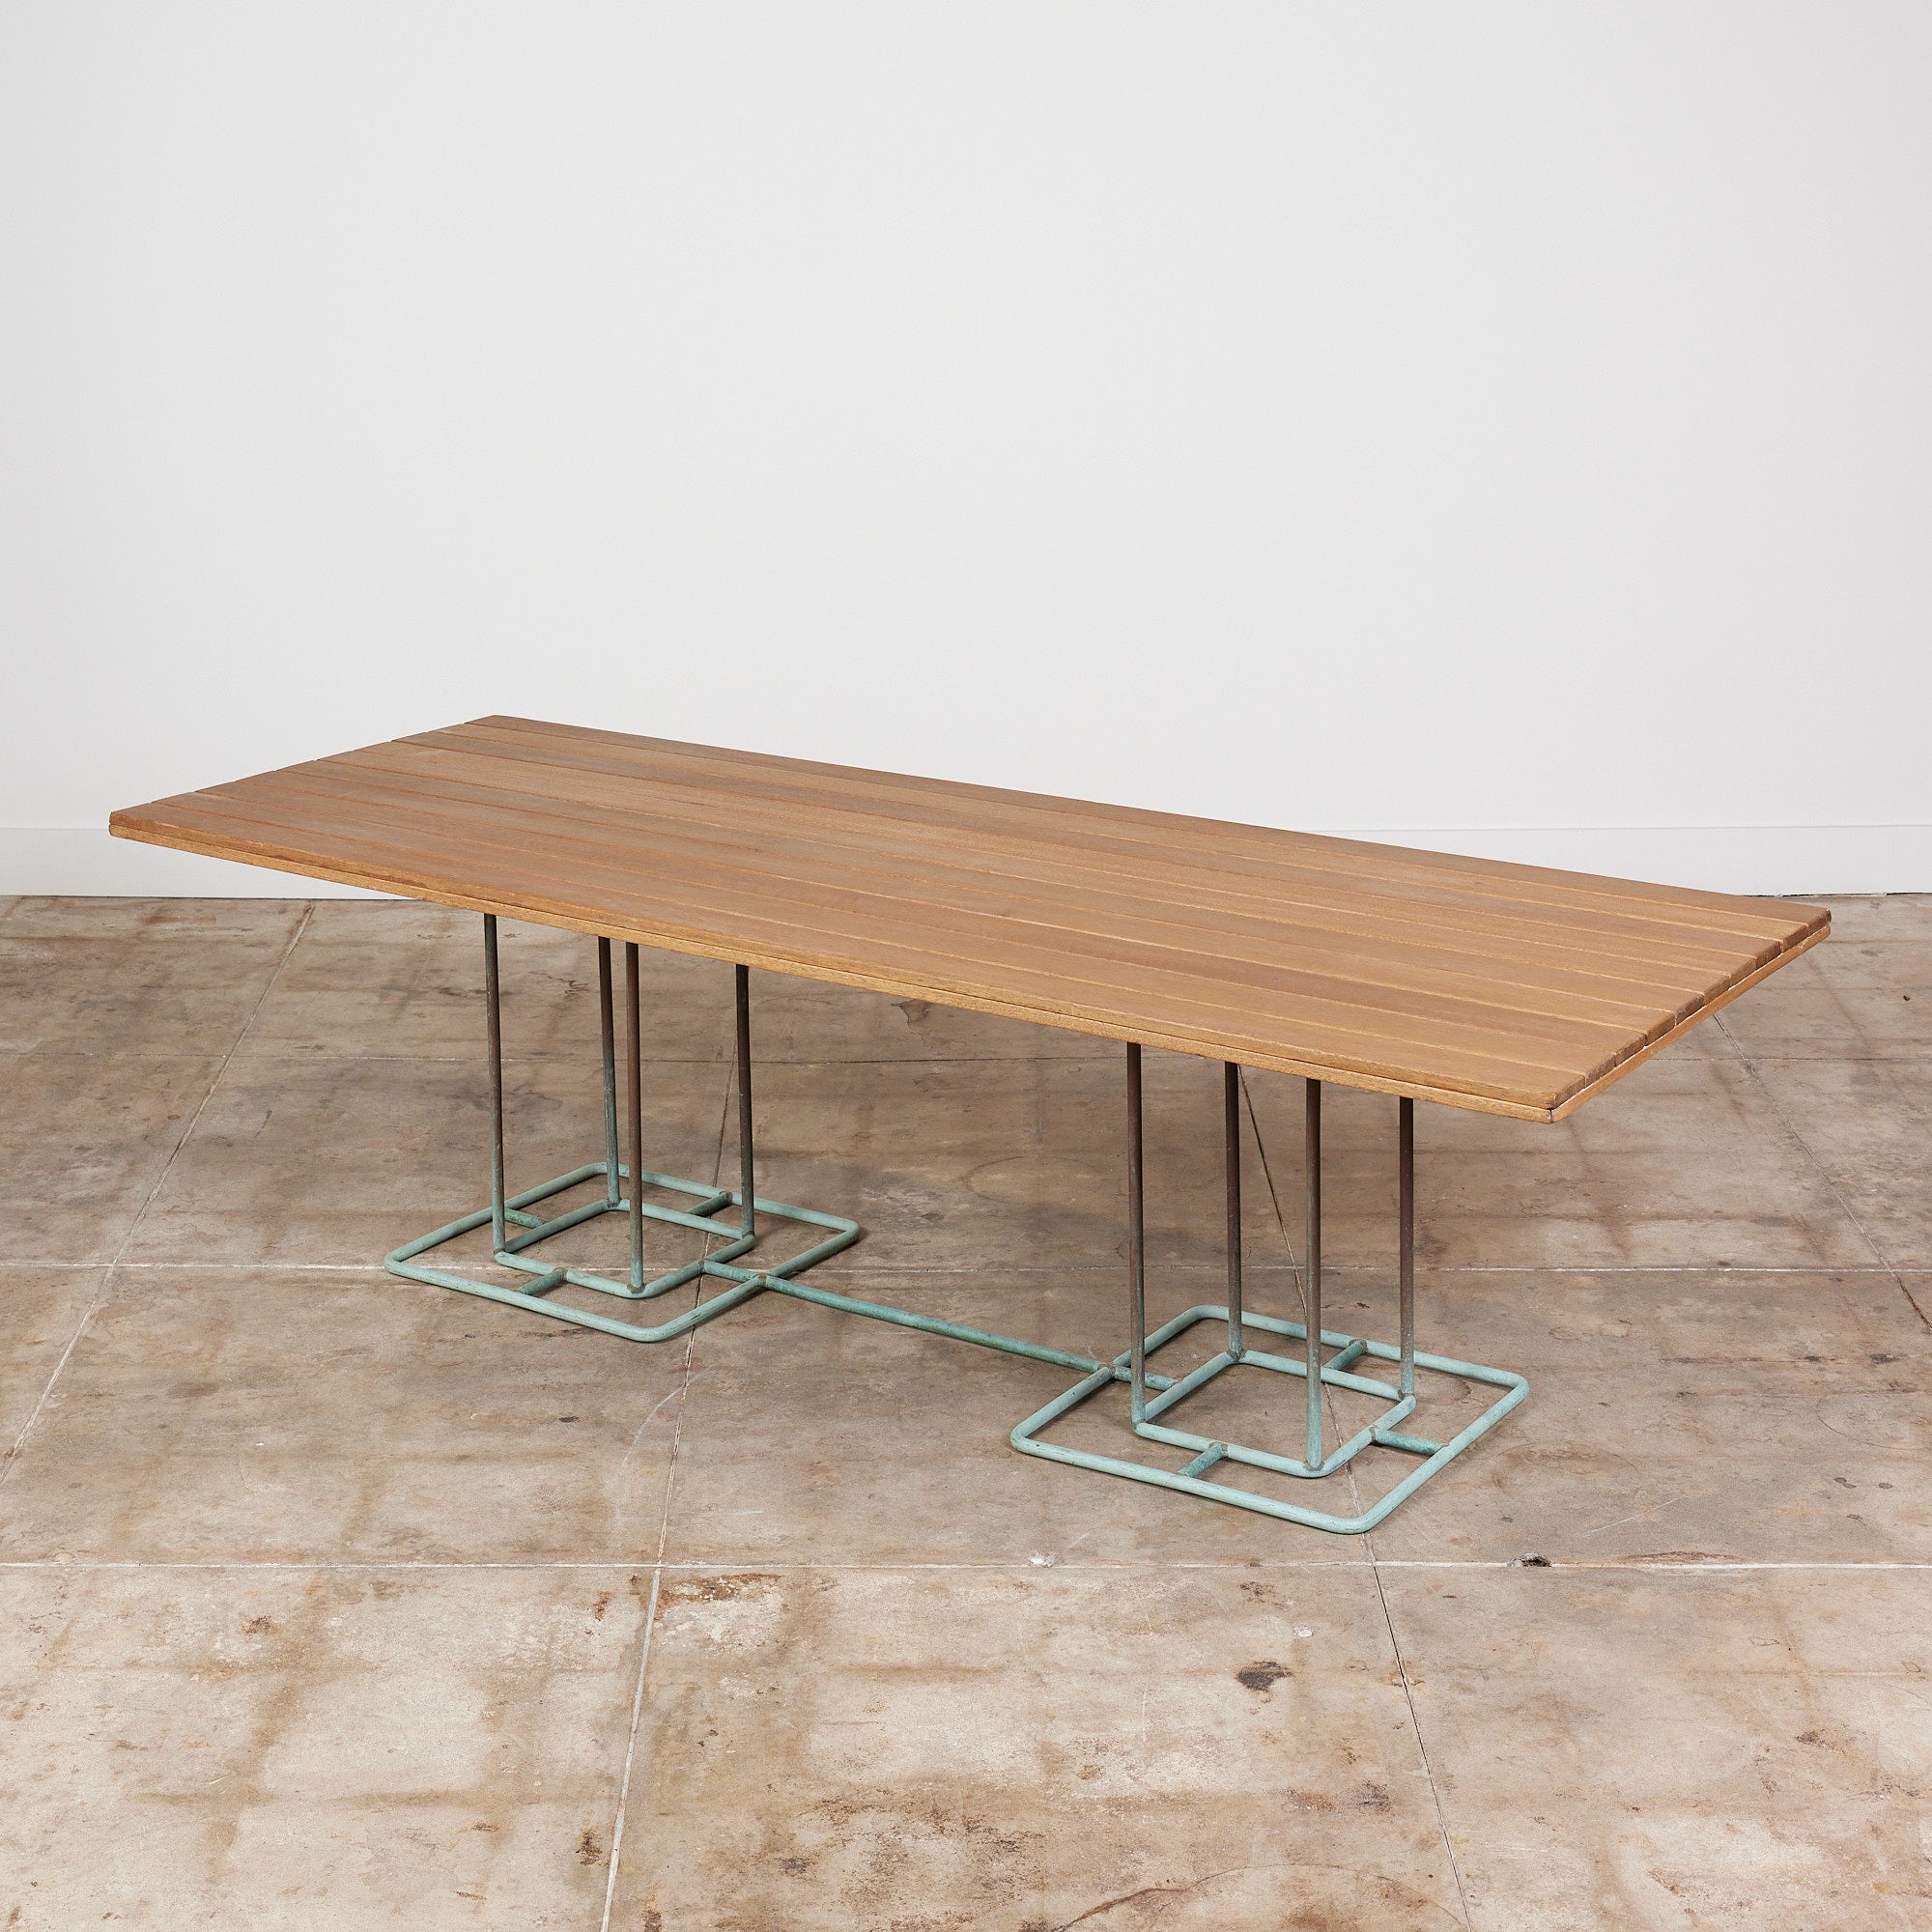 An impressive eight foot rectangular patio table designed by Walter Lamb and manufactured by Brown Jordan. The table has a slatted surface in the original weathered wood, mounted on a double bronze base. Its subtle geometry suggests an Arts & Crafts